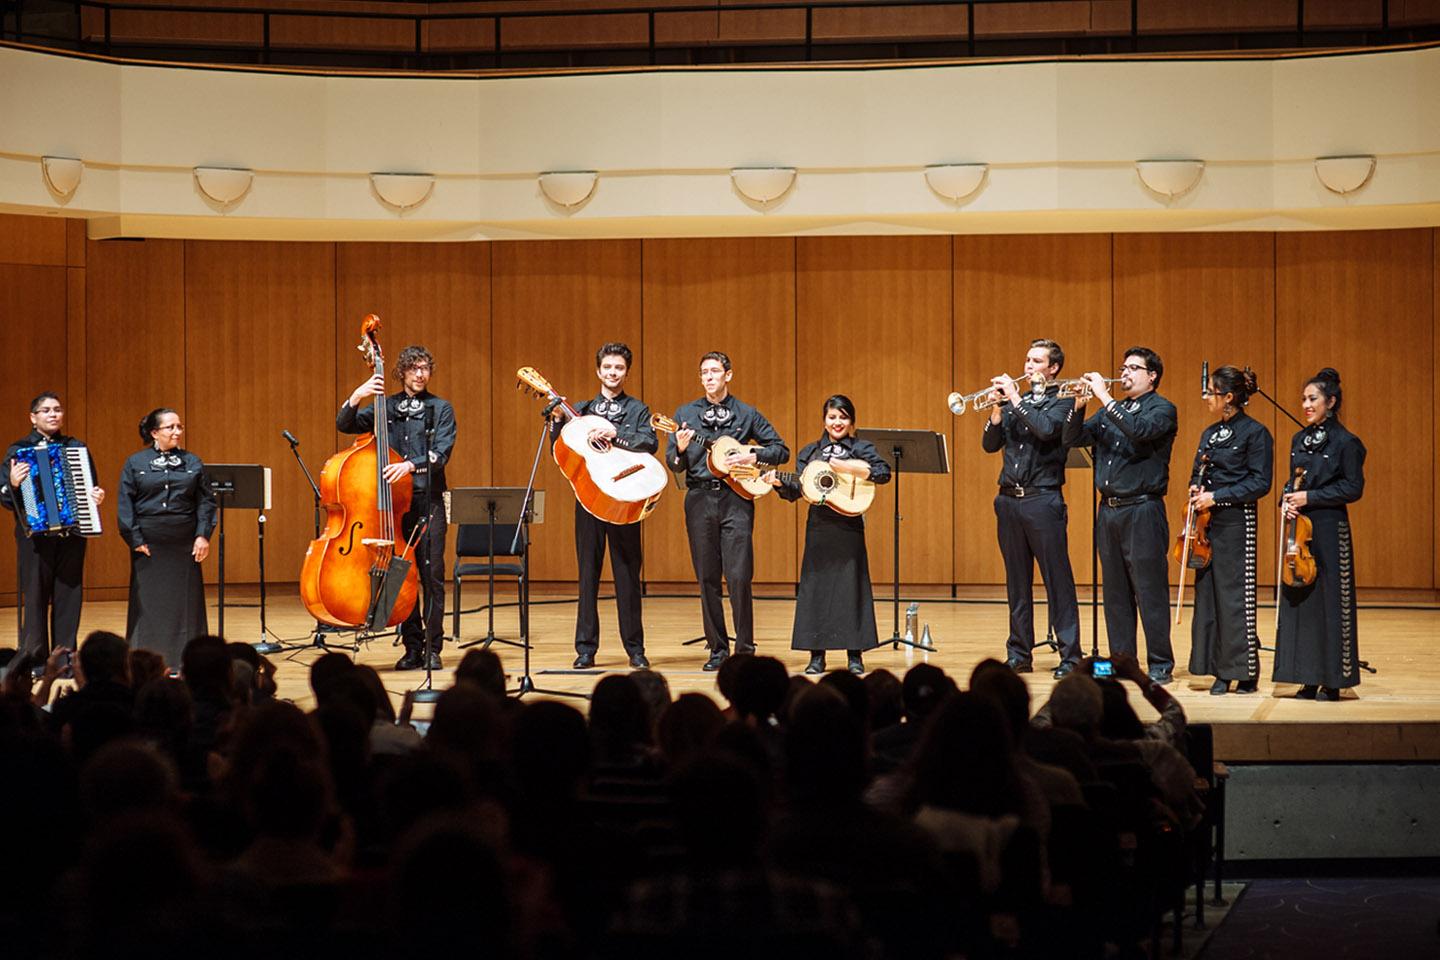 Mariachi ensemble performing in the King Center Concert H所有